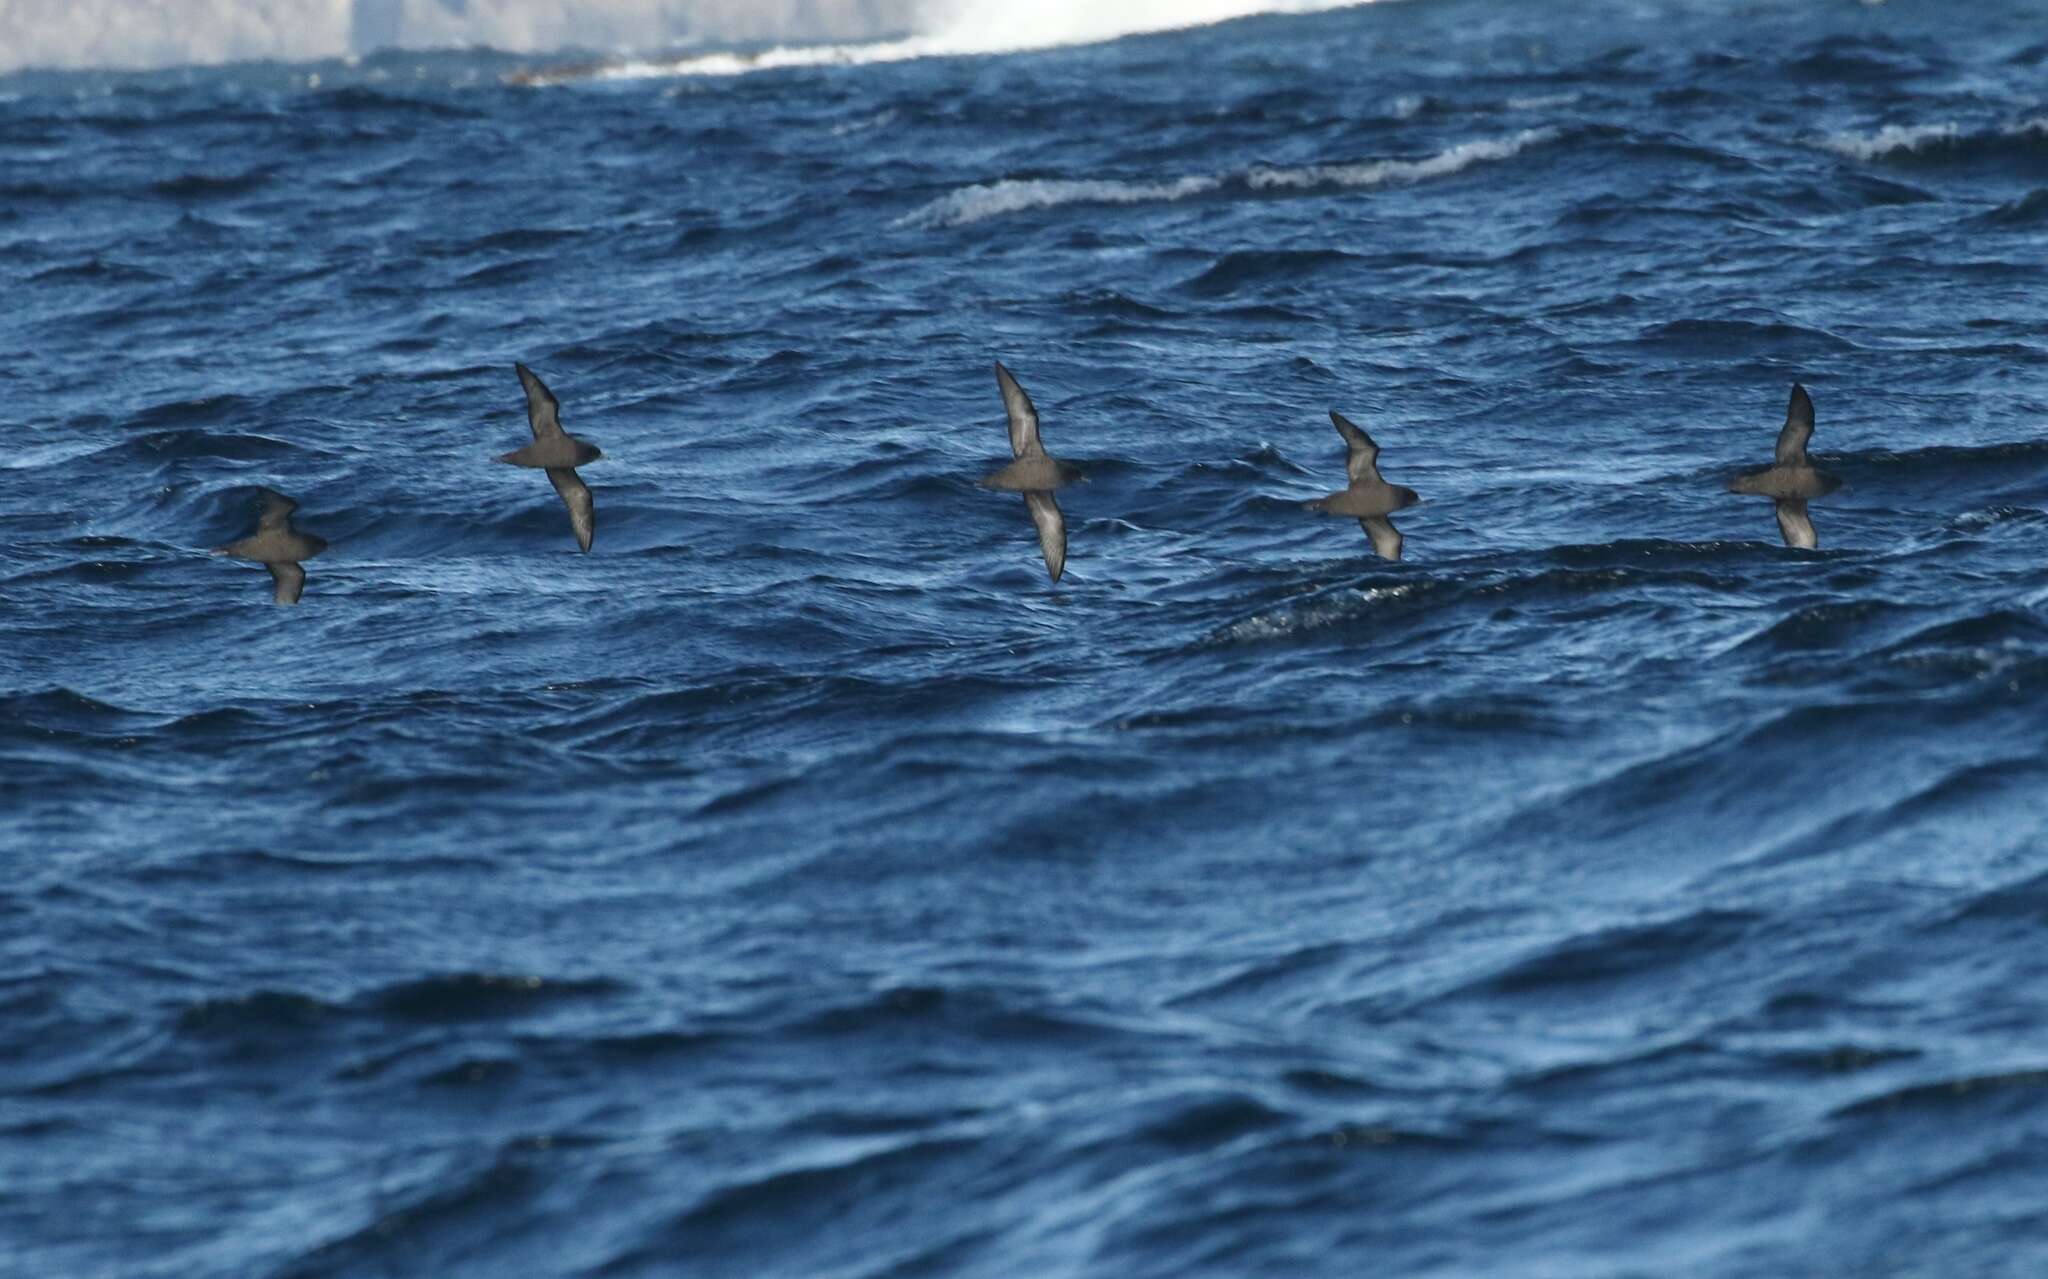 Image of Short-tailed Shearwater